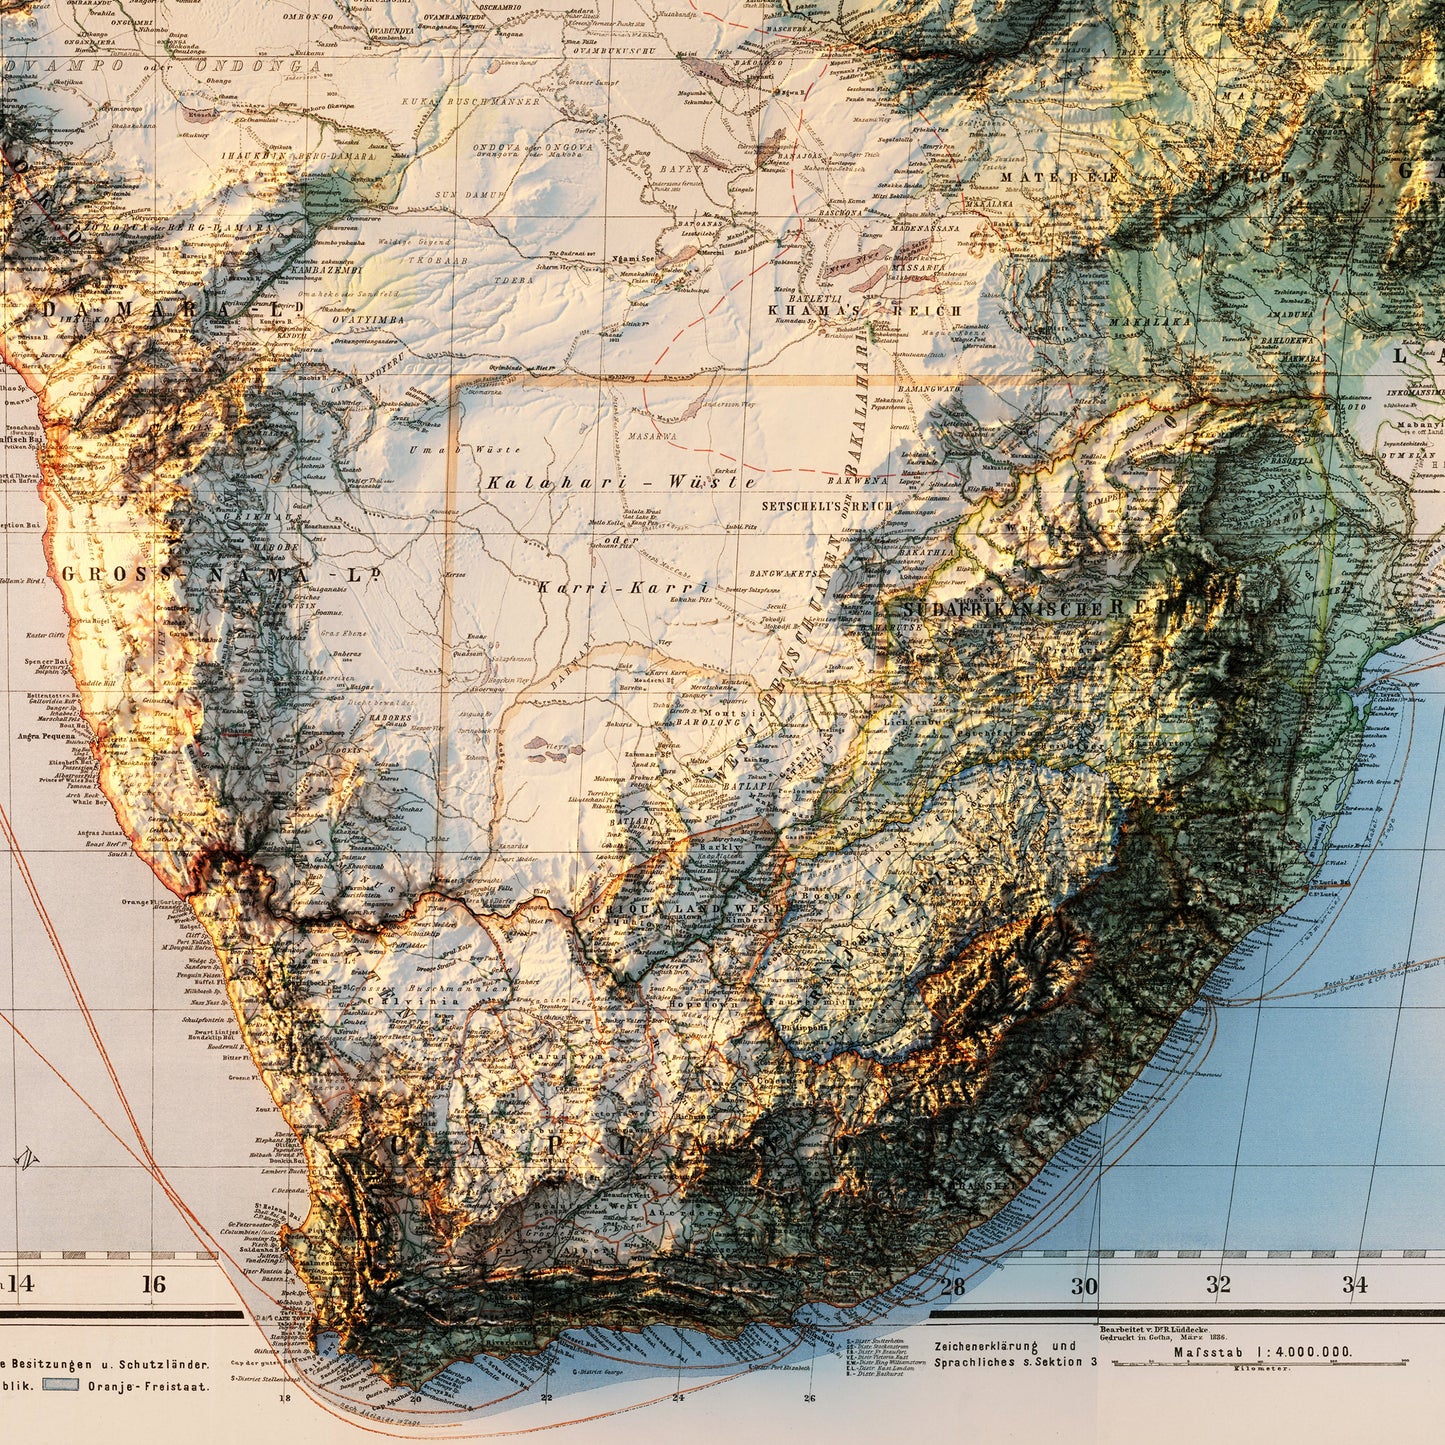 Africa 1885 Shaded Relief Map